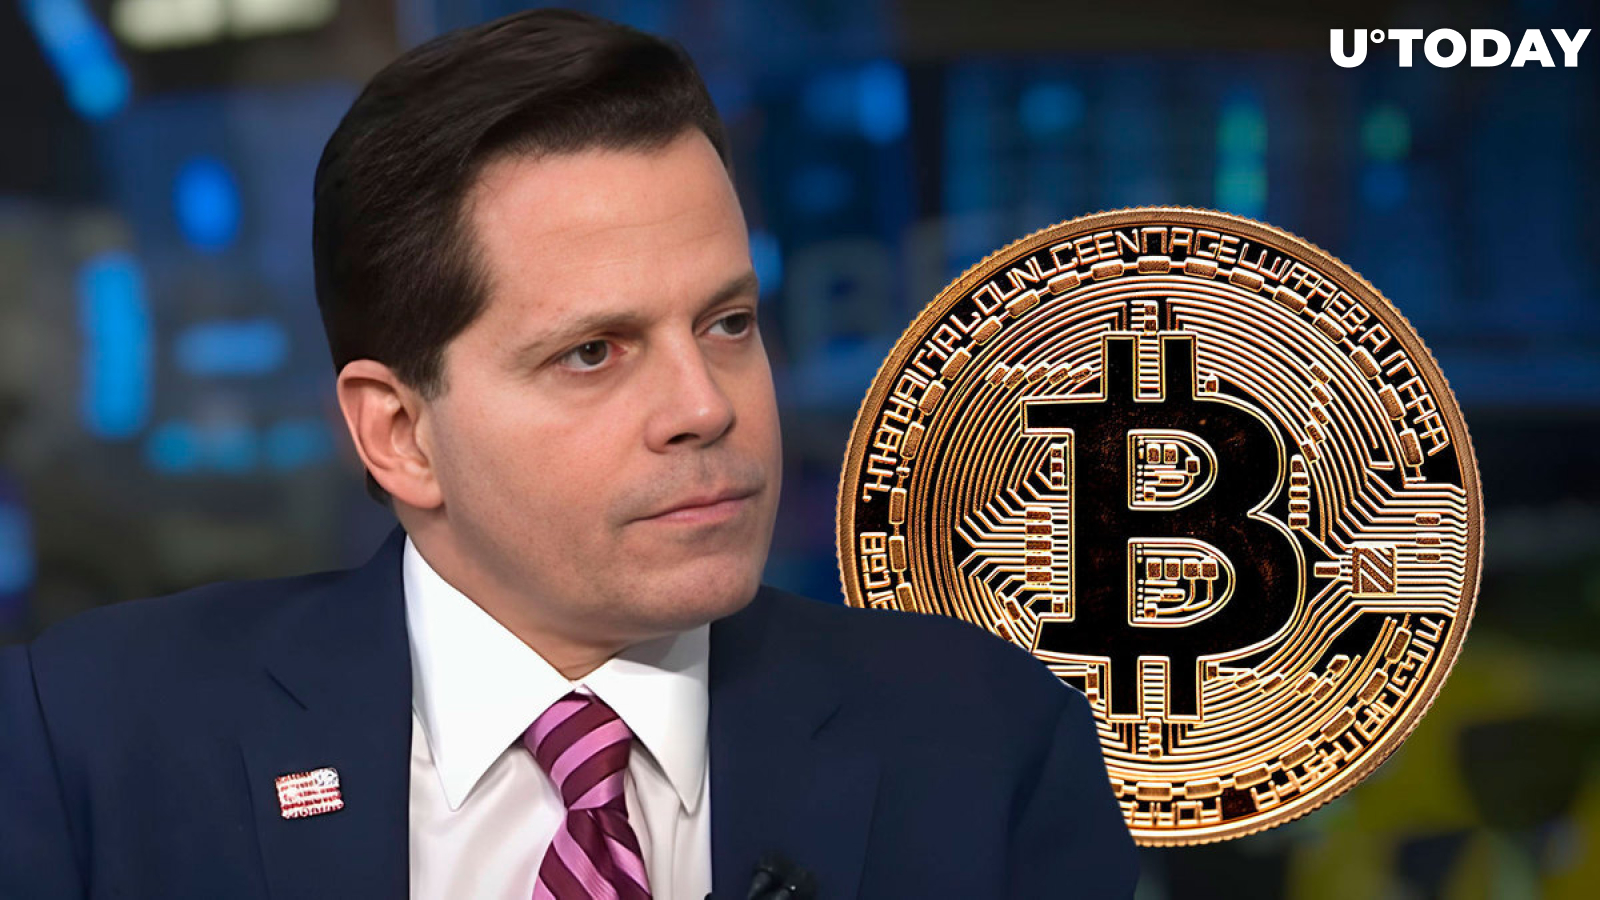 Bitcoin (BTC) to Hit $750,000 by End of Decade, Anthony Scaramucci Believes